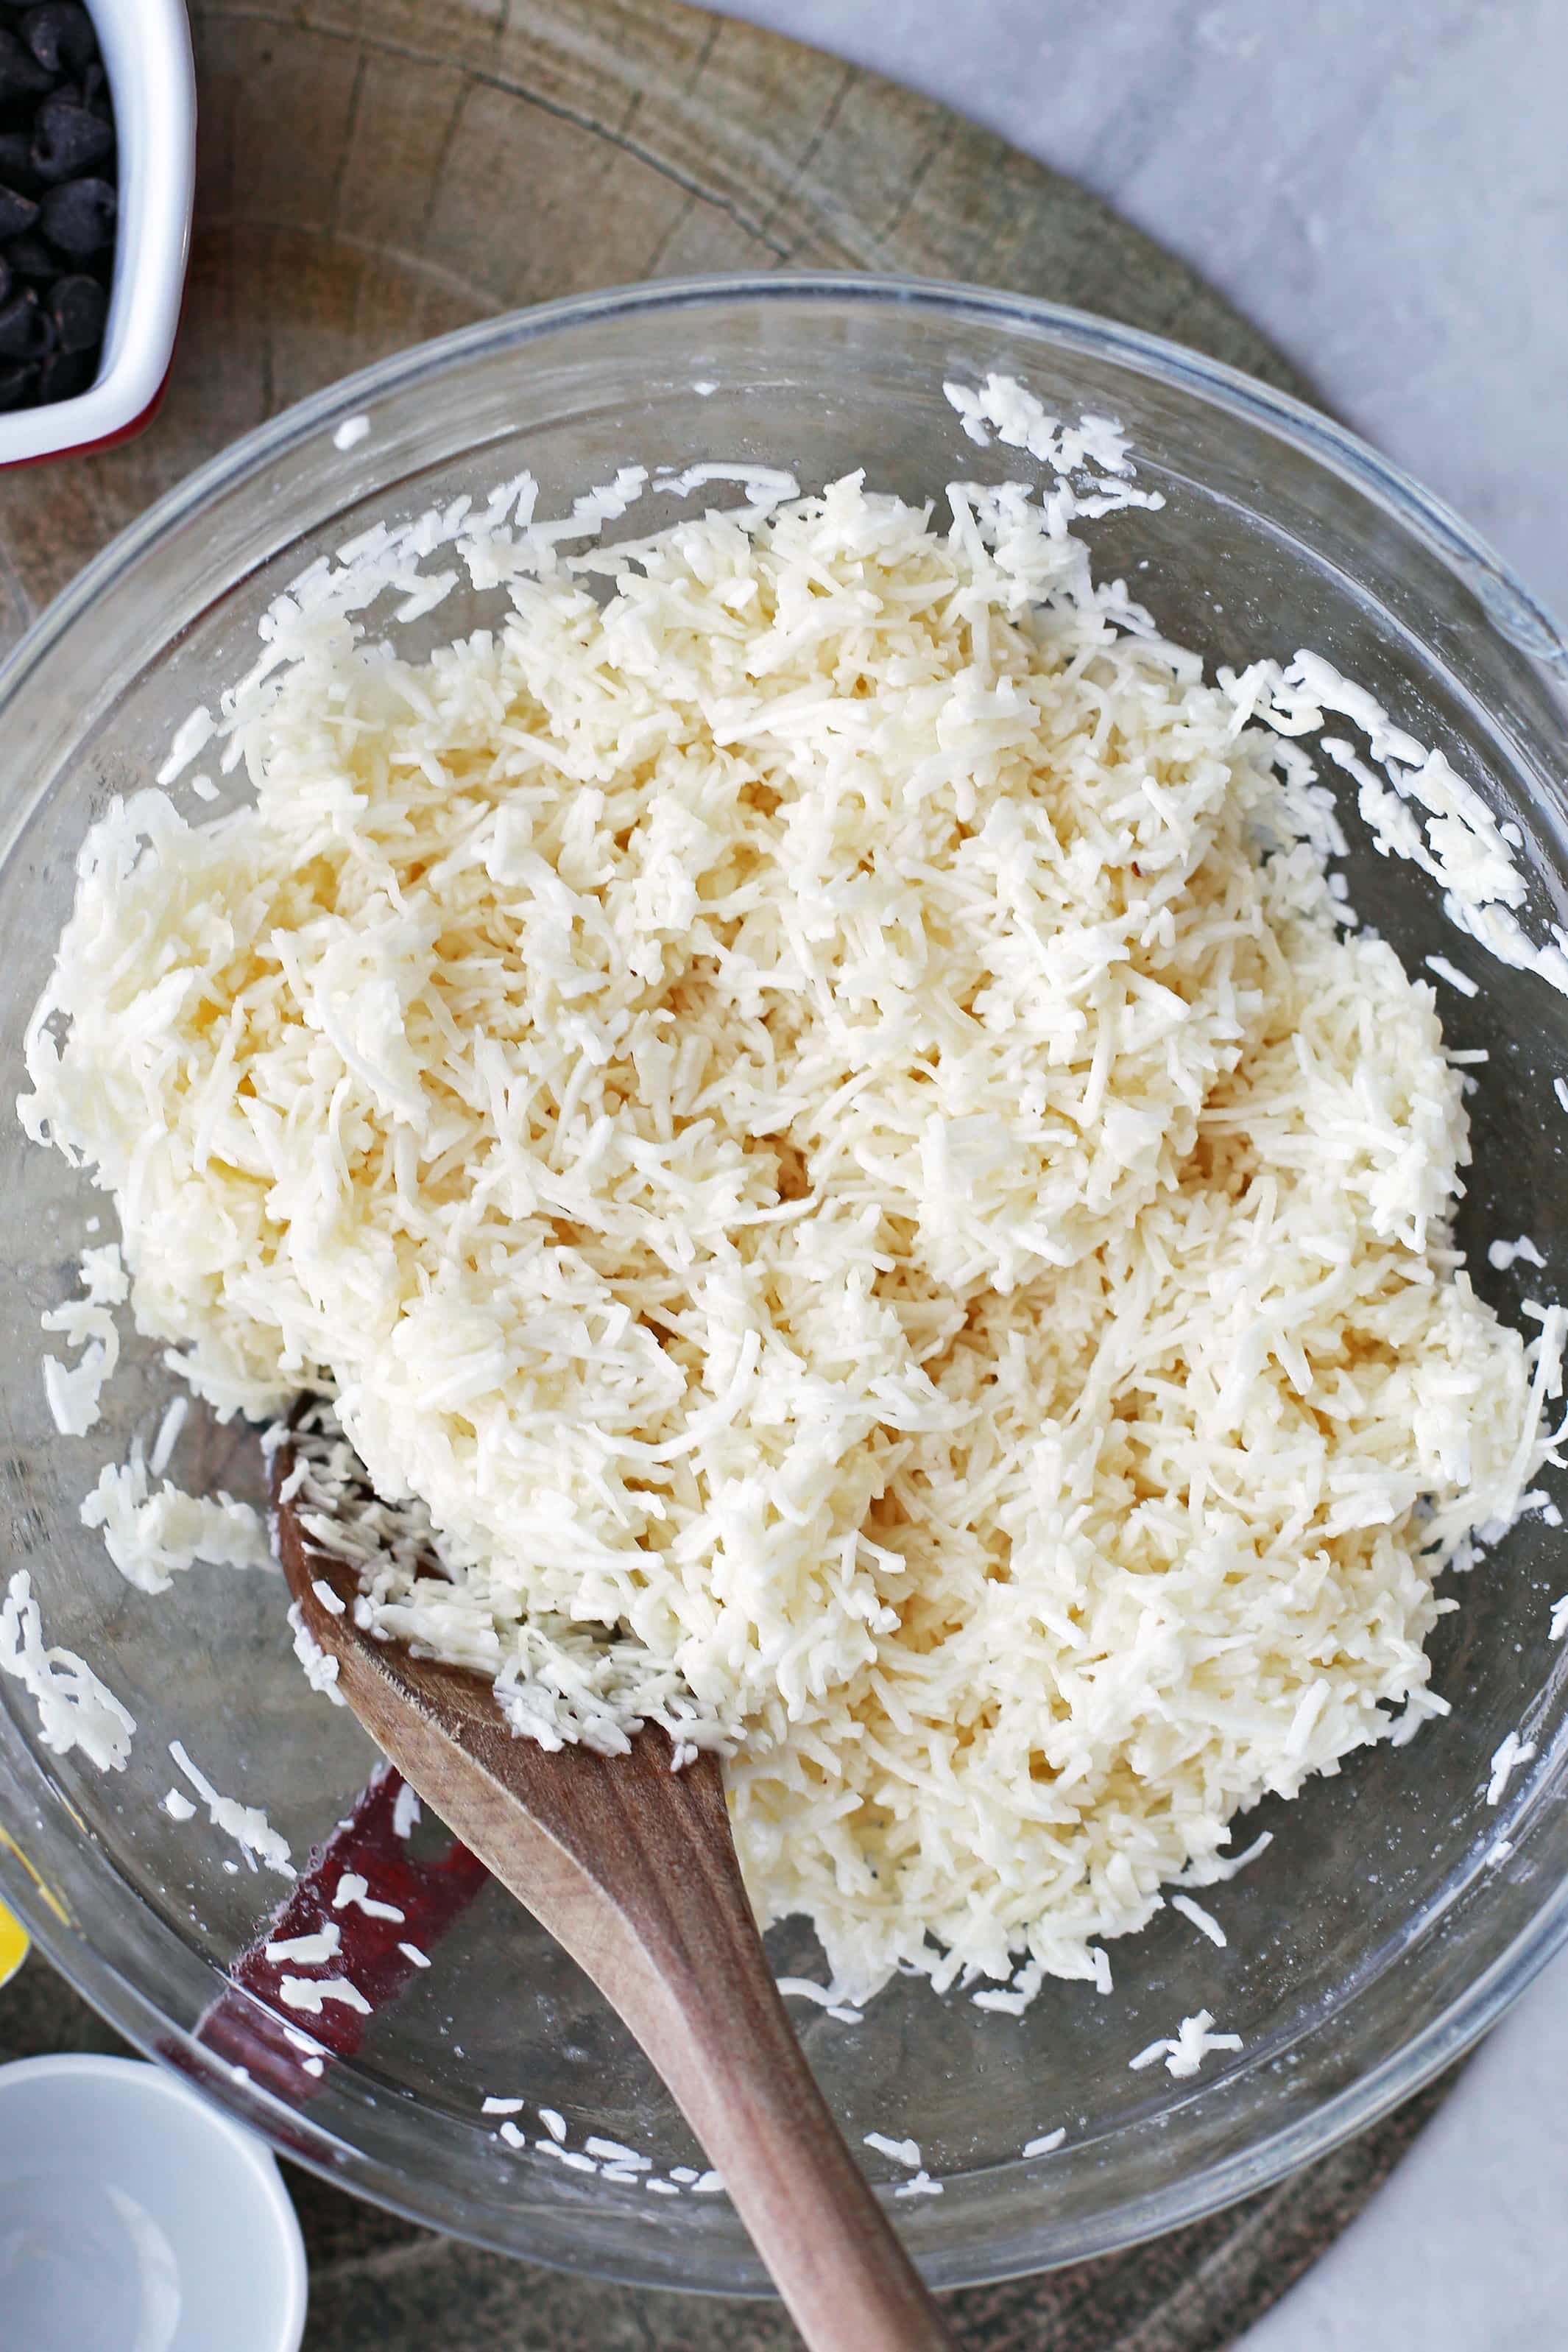 Shredded coconut, egg whites, sugar, peppermint extract, and salt in a large glass bowl.